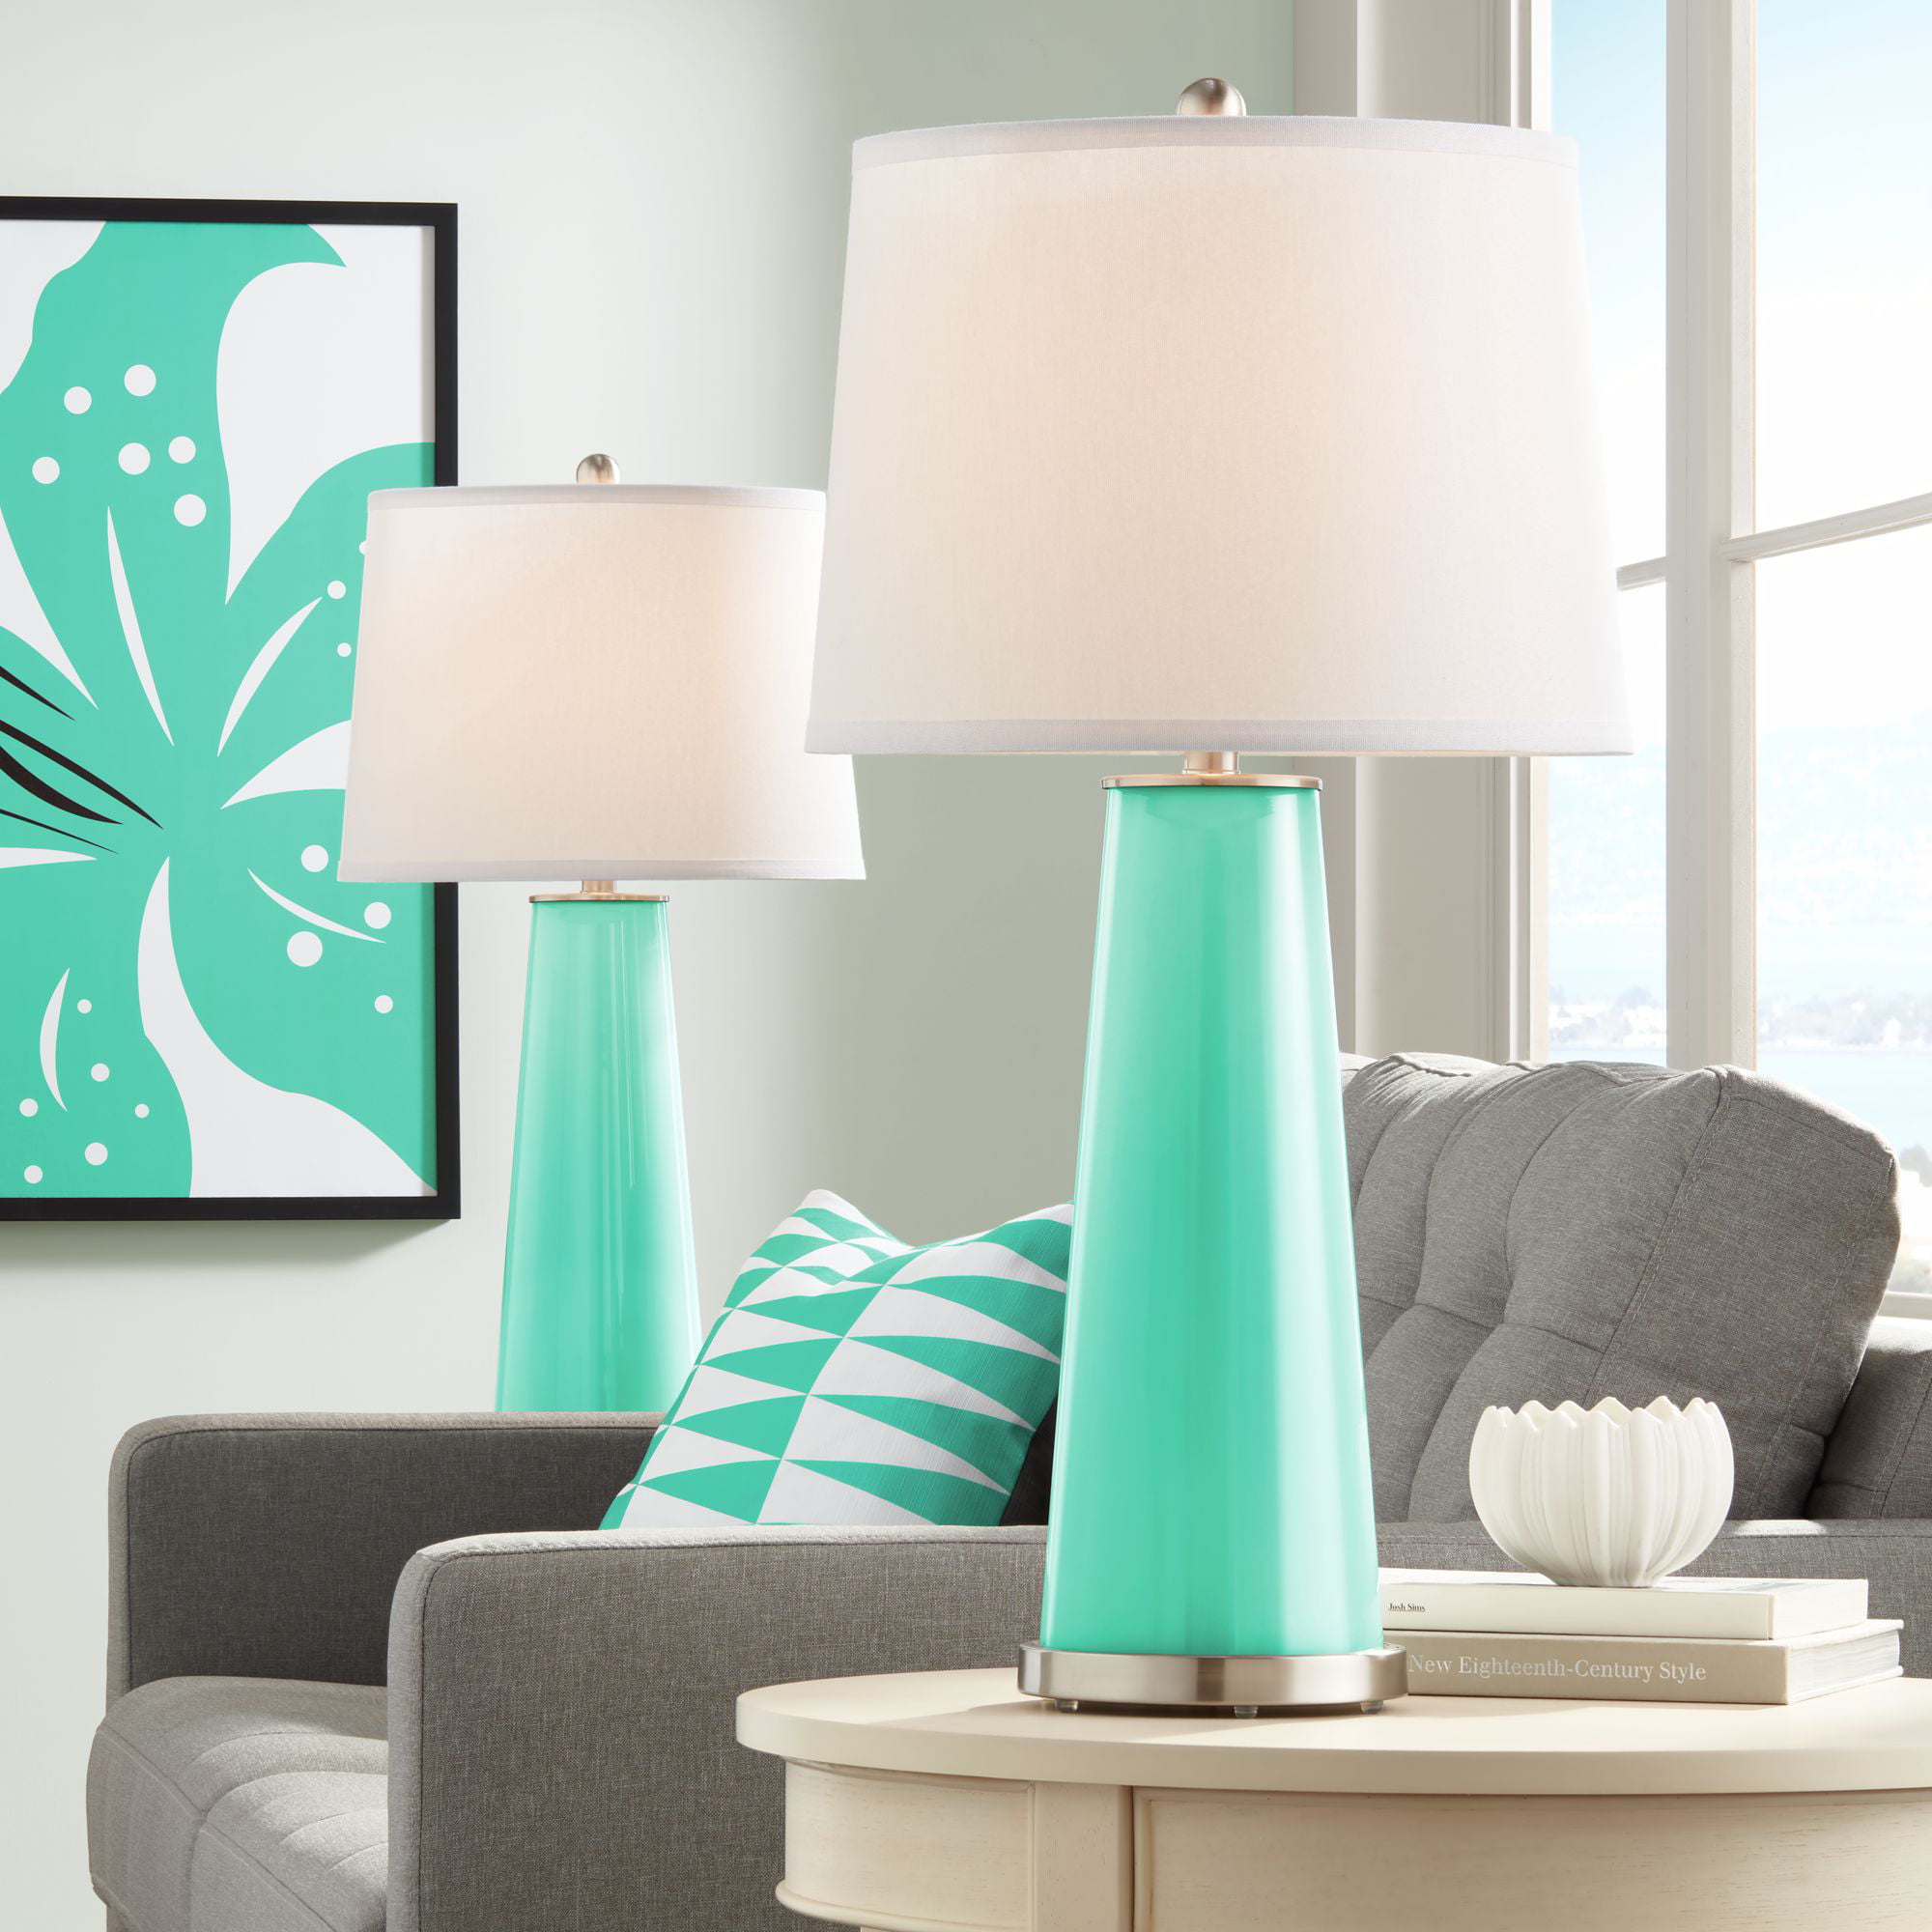 Color Plus Modern Table Lamps Set of 2 Turquoise Glass ...